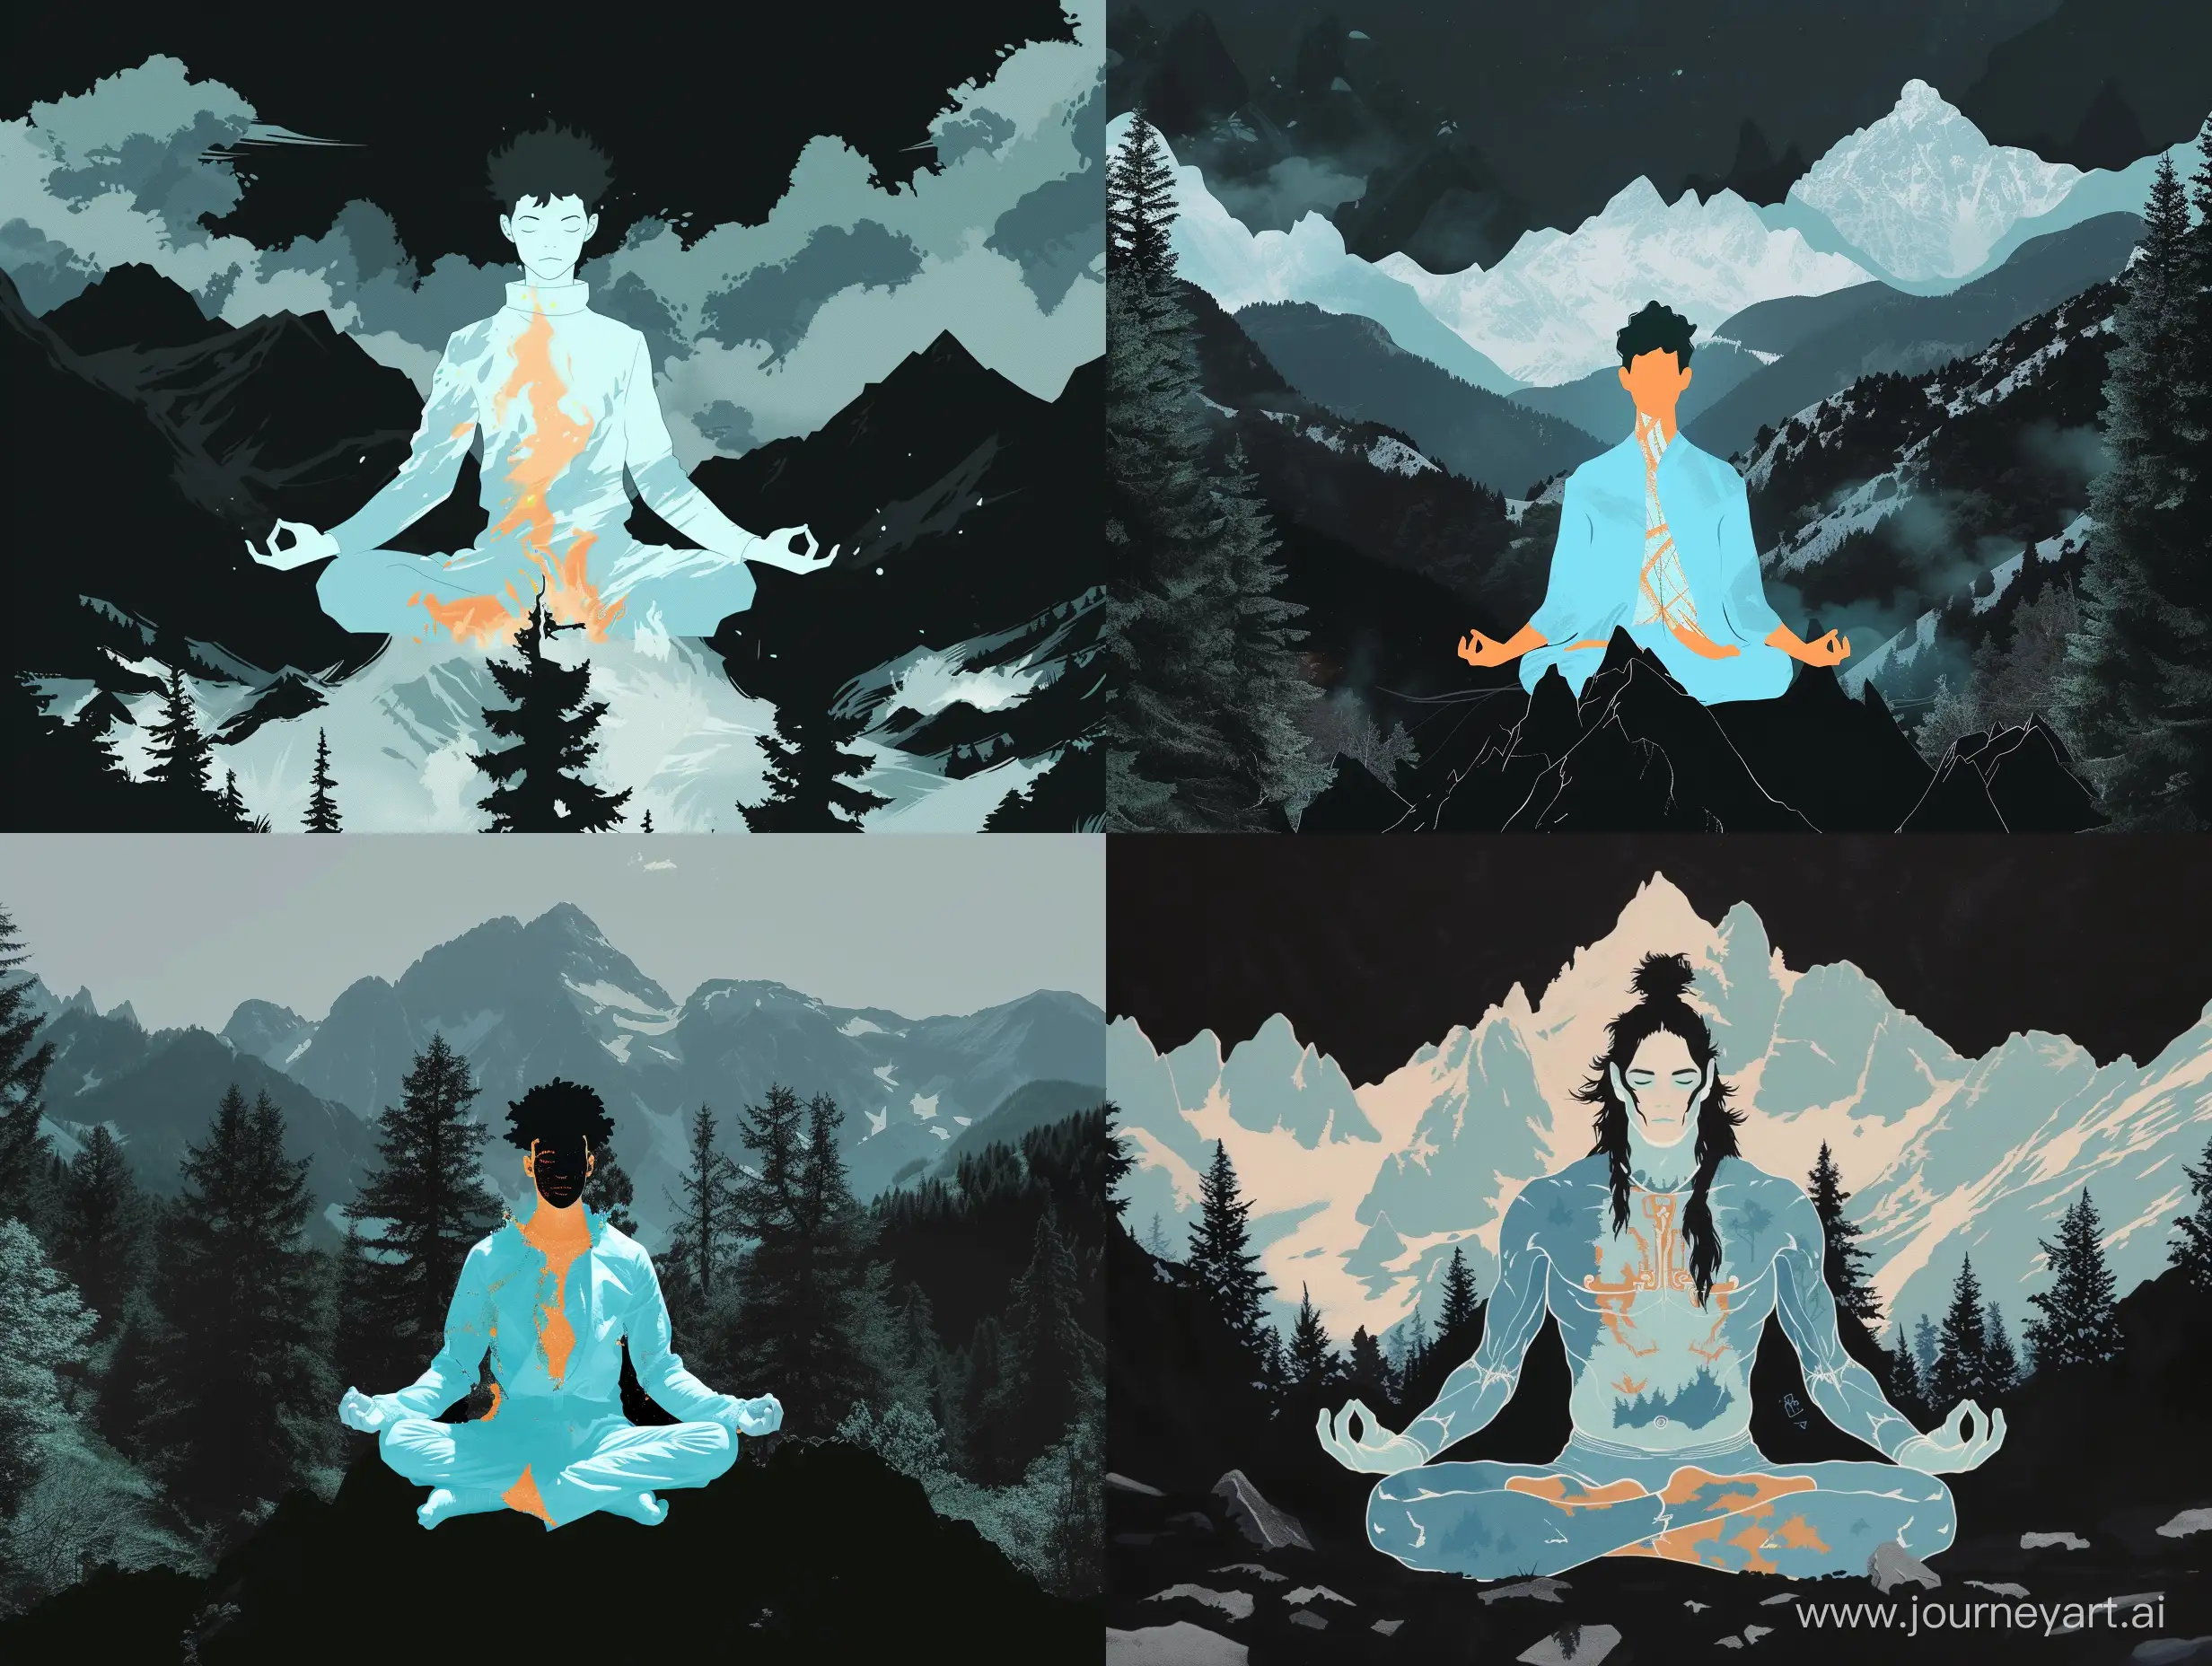 Meditating-Figure-in-Mountain-Serenity-Tranquil-Scene-with-Light-Blue-Clothed-Figure-Amidst-Black-Trees